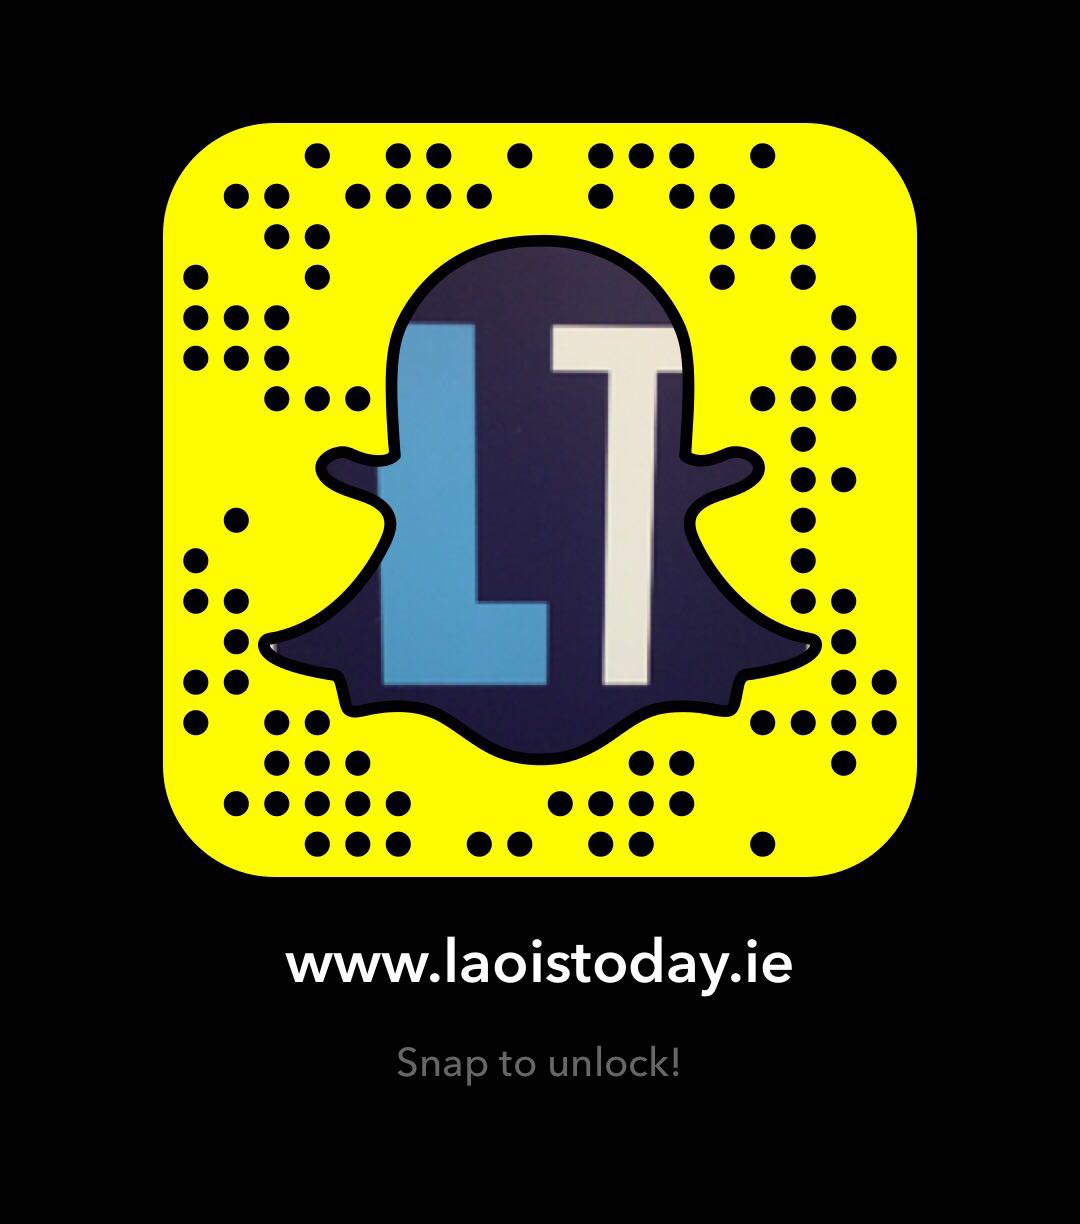 The LaoisToday top 25 list of Laois Snapchatters is here!